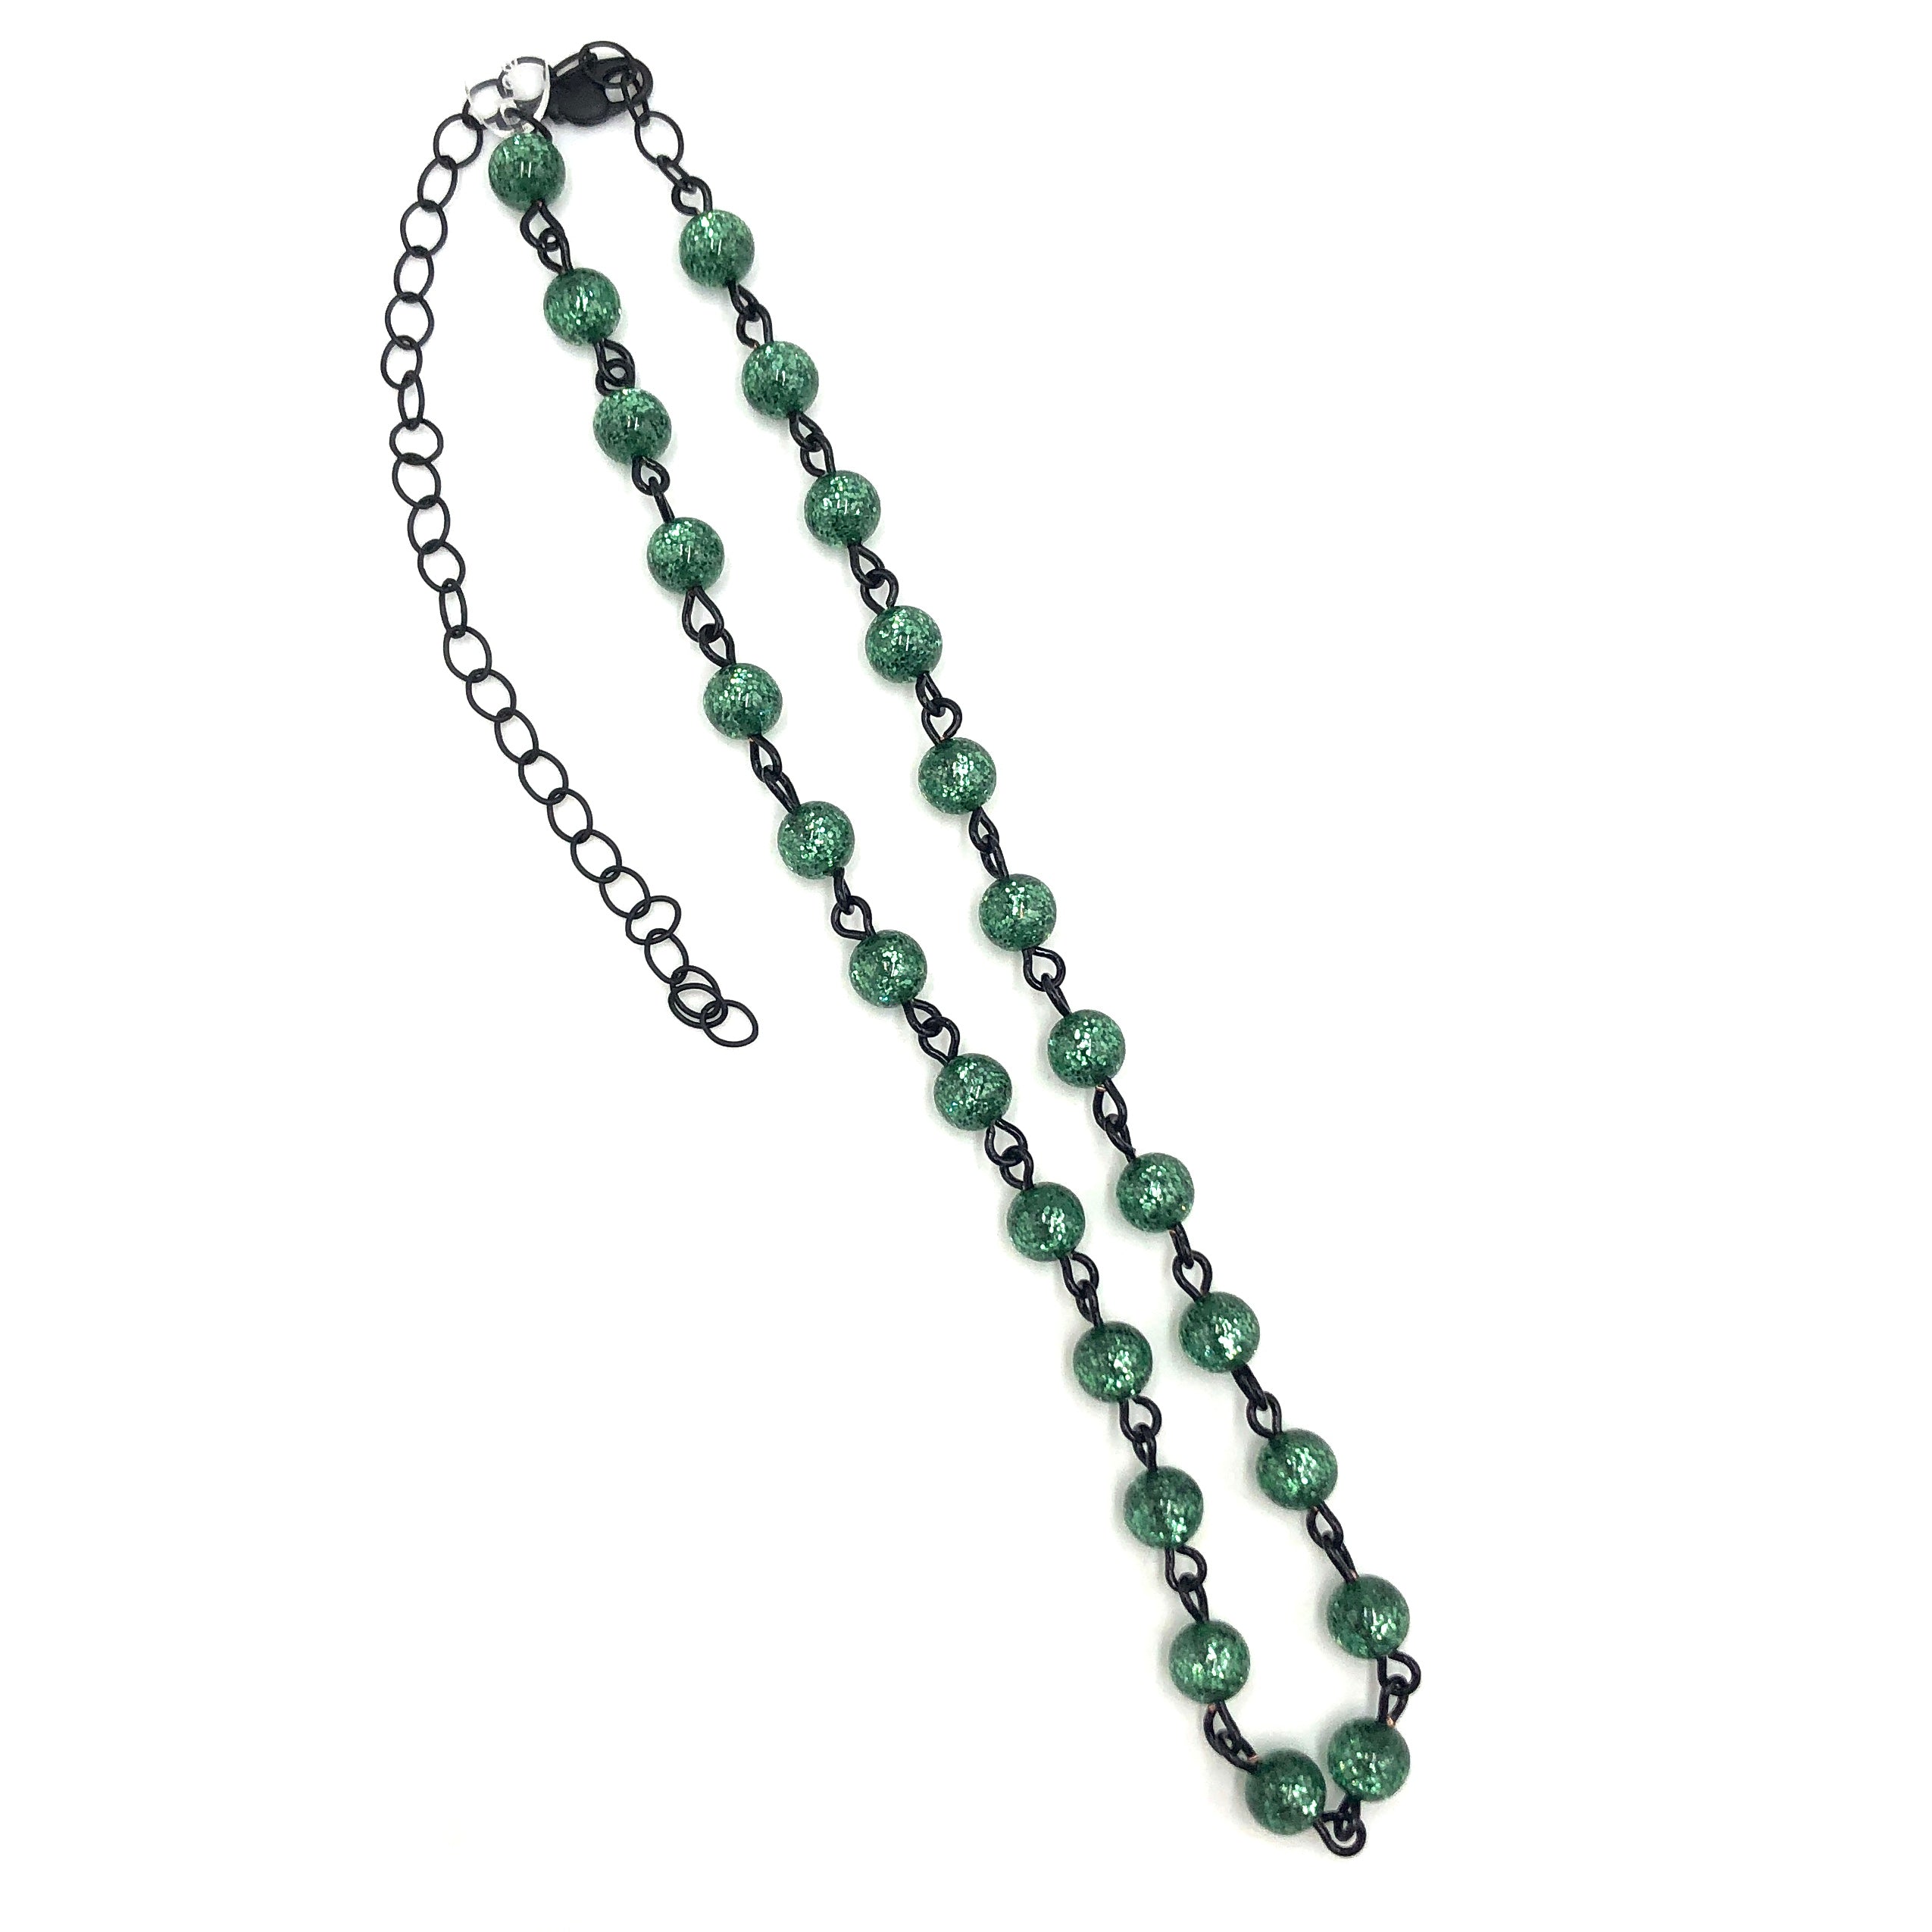 Emerald green glitter beaded hand wired necklace